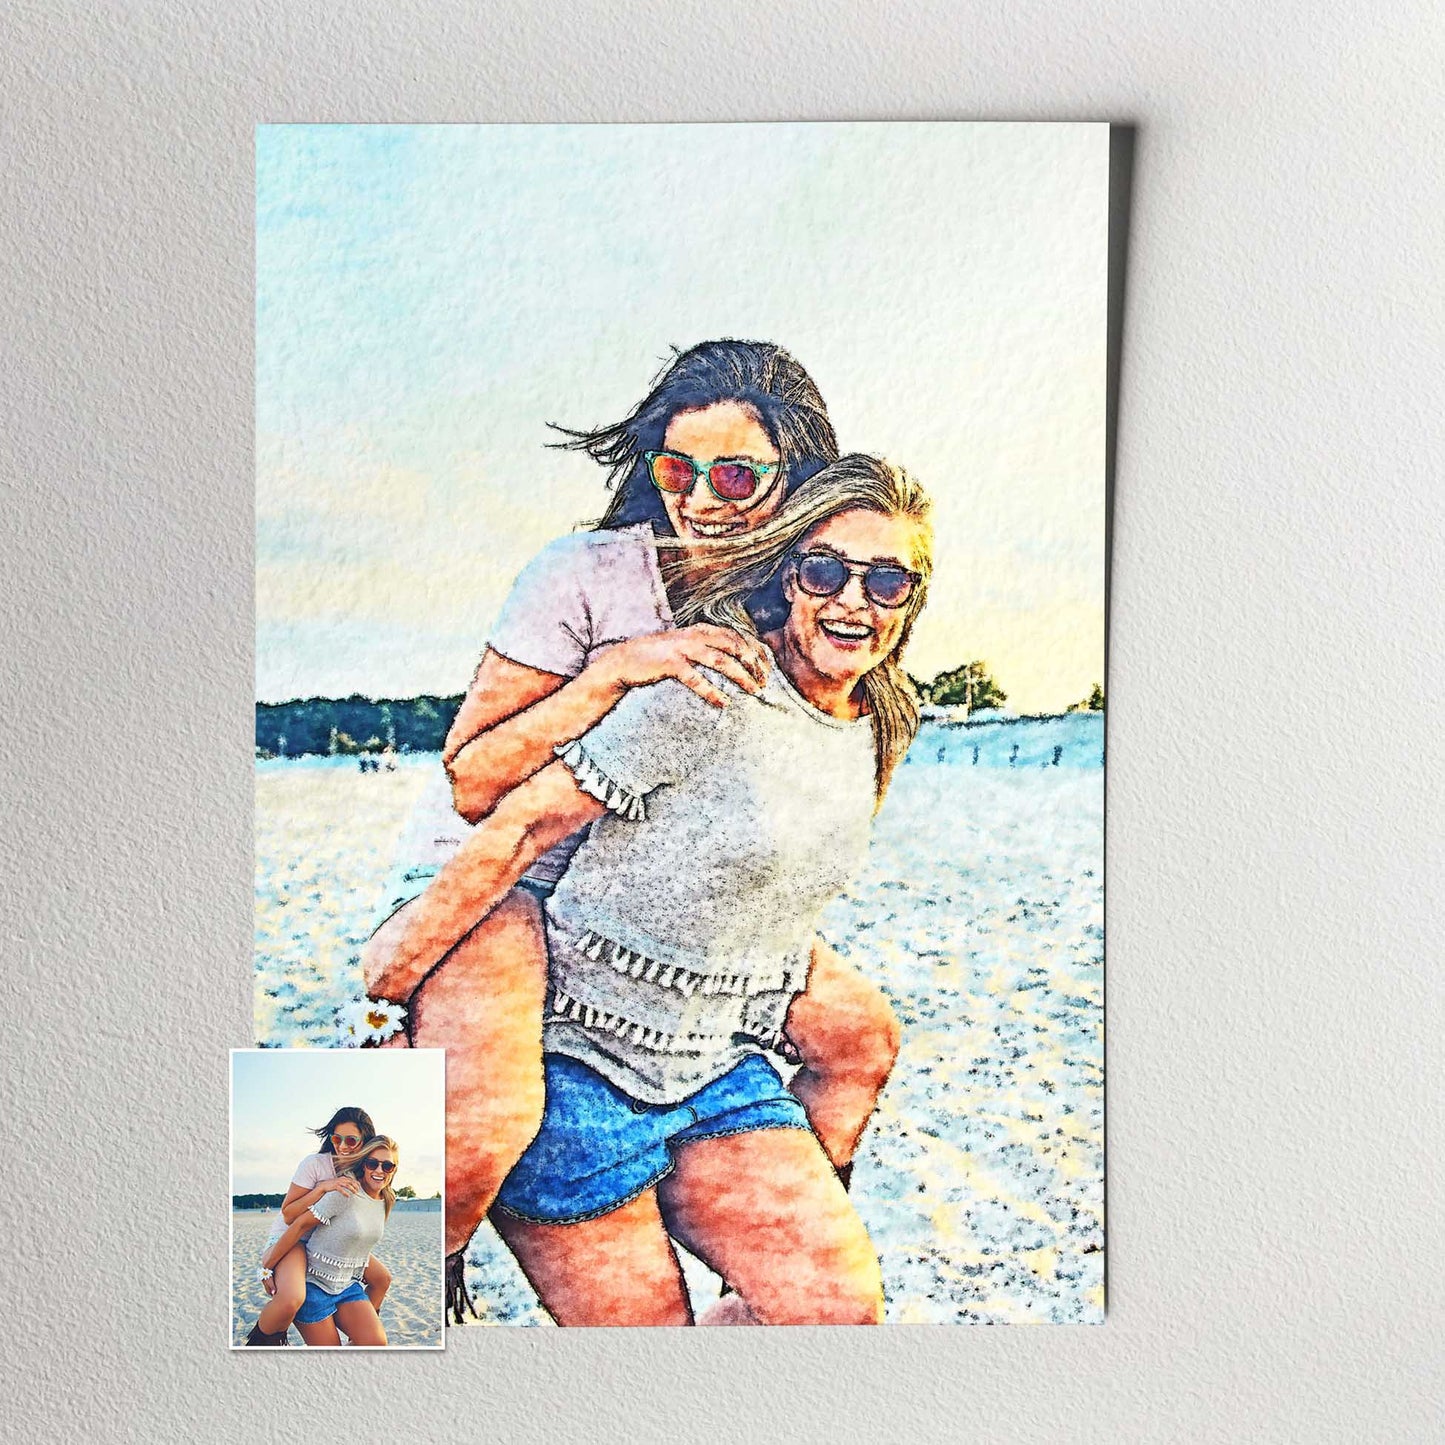 Gallery-Quality Watercolor Print: This personalised watercolor painting print is crafted on gallery-quality thick paper, ensuring a premium finish that will impress art enthusiasts. The vivid colors and intricate brushstrokes 